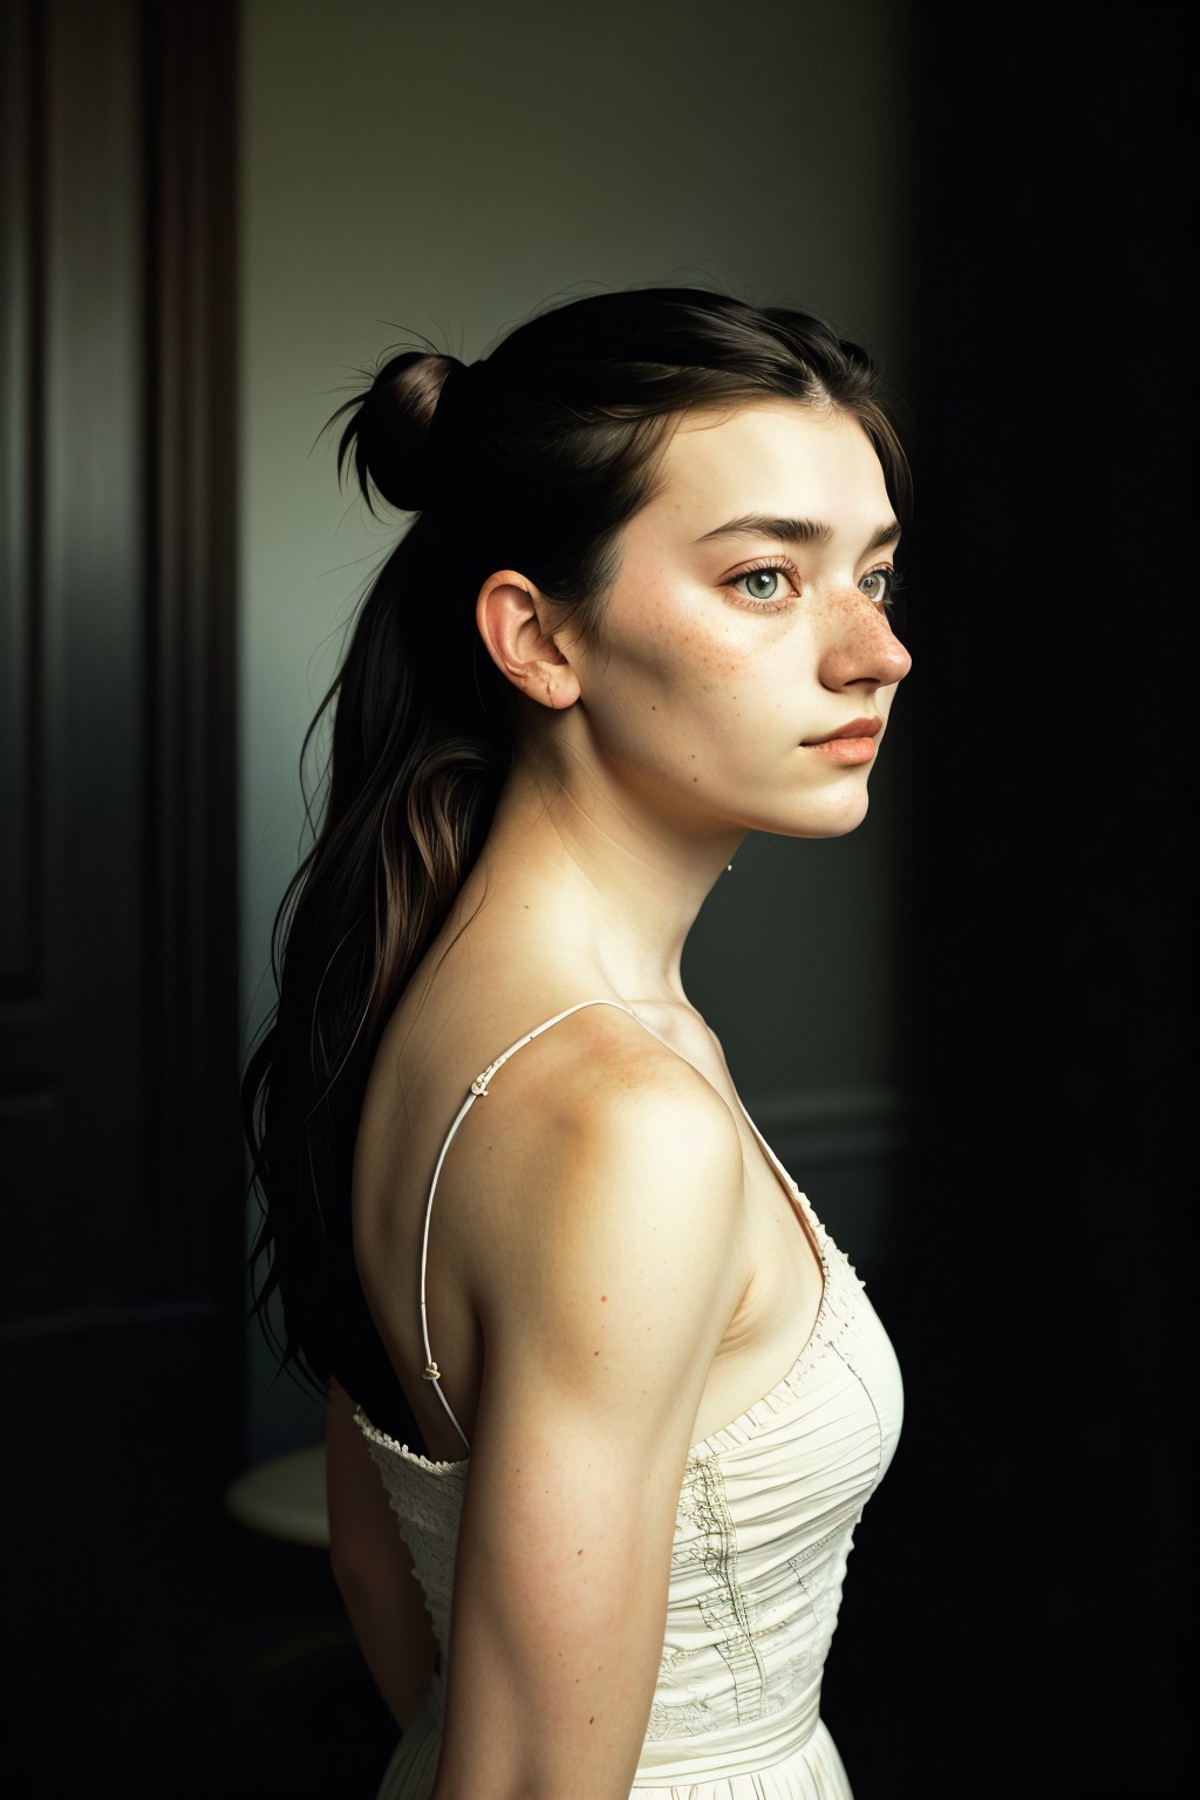 Jessica Clements image by demoran